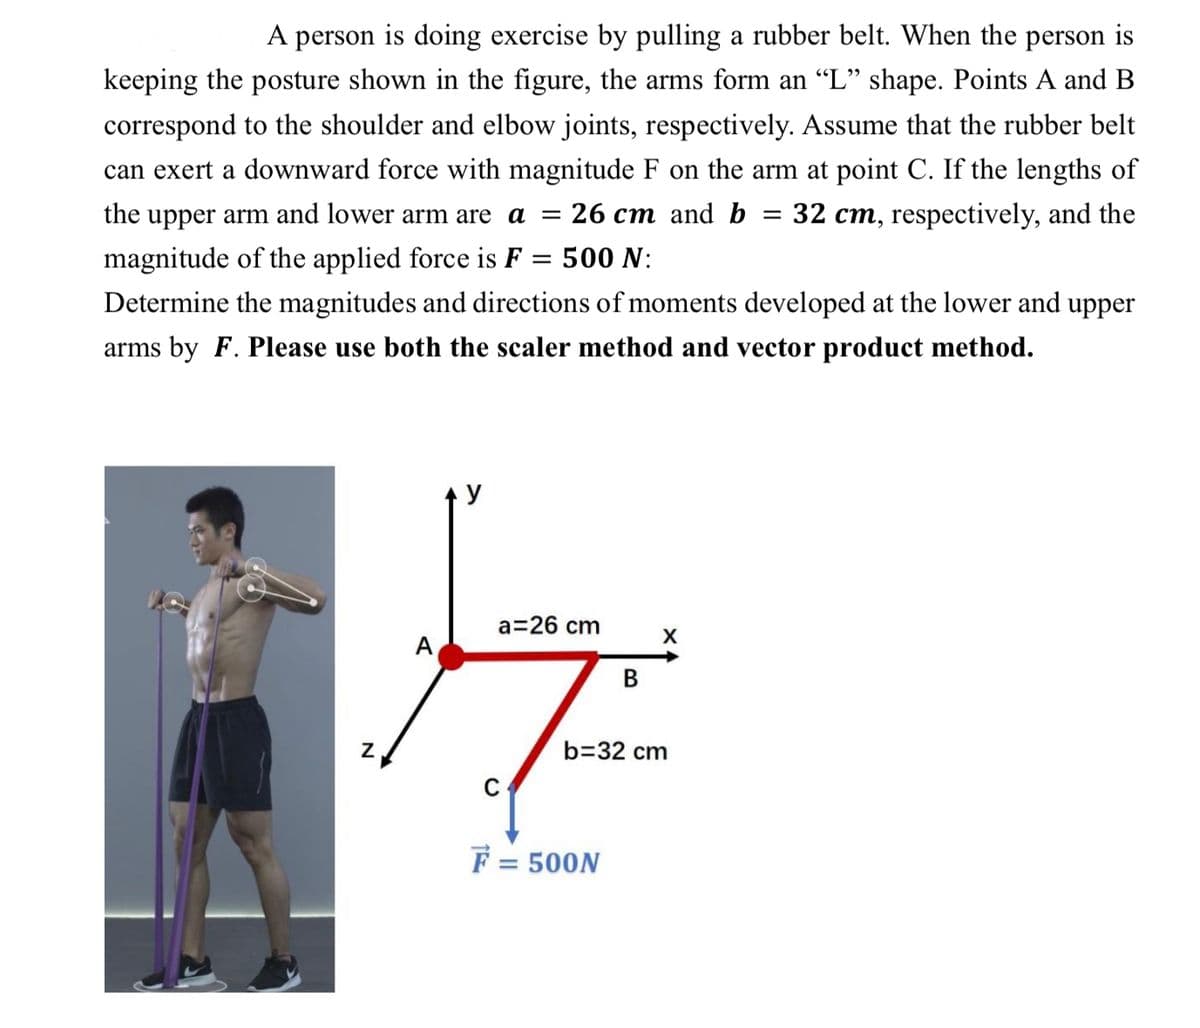 A person is doing exercise by pulling a rubber belt. When the person is
keeping the posture shown in the figure, the arms form an "L" shape. Points A and B
correspond to the shoulder and elbow joints, respectively. Assume that the rubber belt
can exert a downward force with magnitude F on the arm at point C. If the lengths of
the upper arm and lower arm are a = 26 cm and b
32 cm, respectively, and the
magnitude of the applied force is F
500 N:
Determine the magnitudes and directions of moments developed at the lower and upper
arms by F. Please use both the scaler method and vector product method.
a=26 cm
A
b=32 cm
F = 500N
B.
